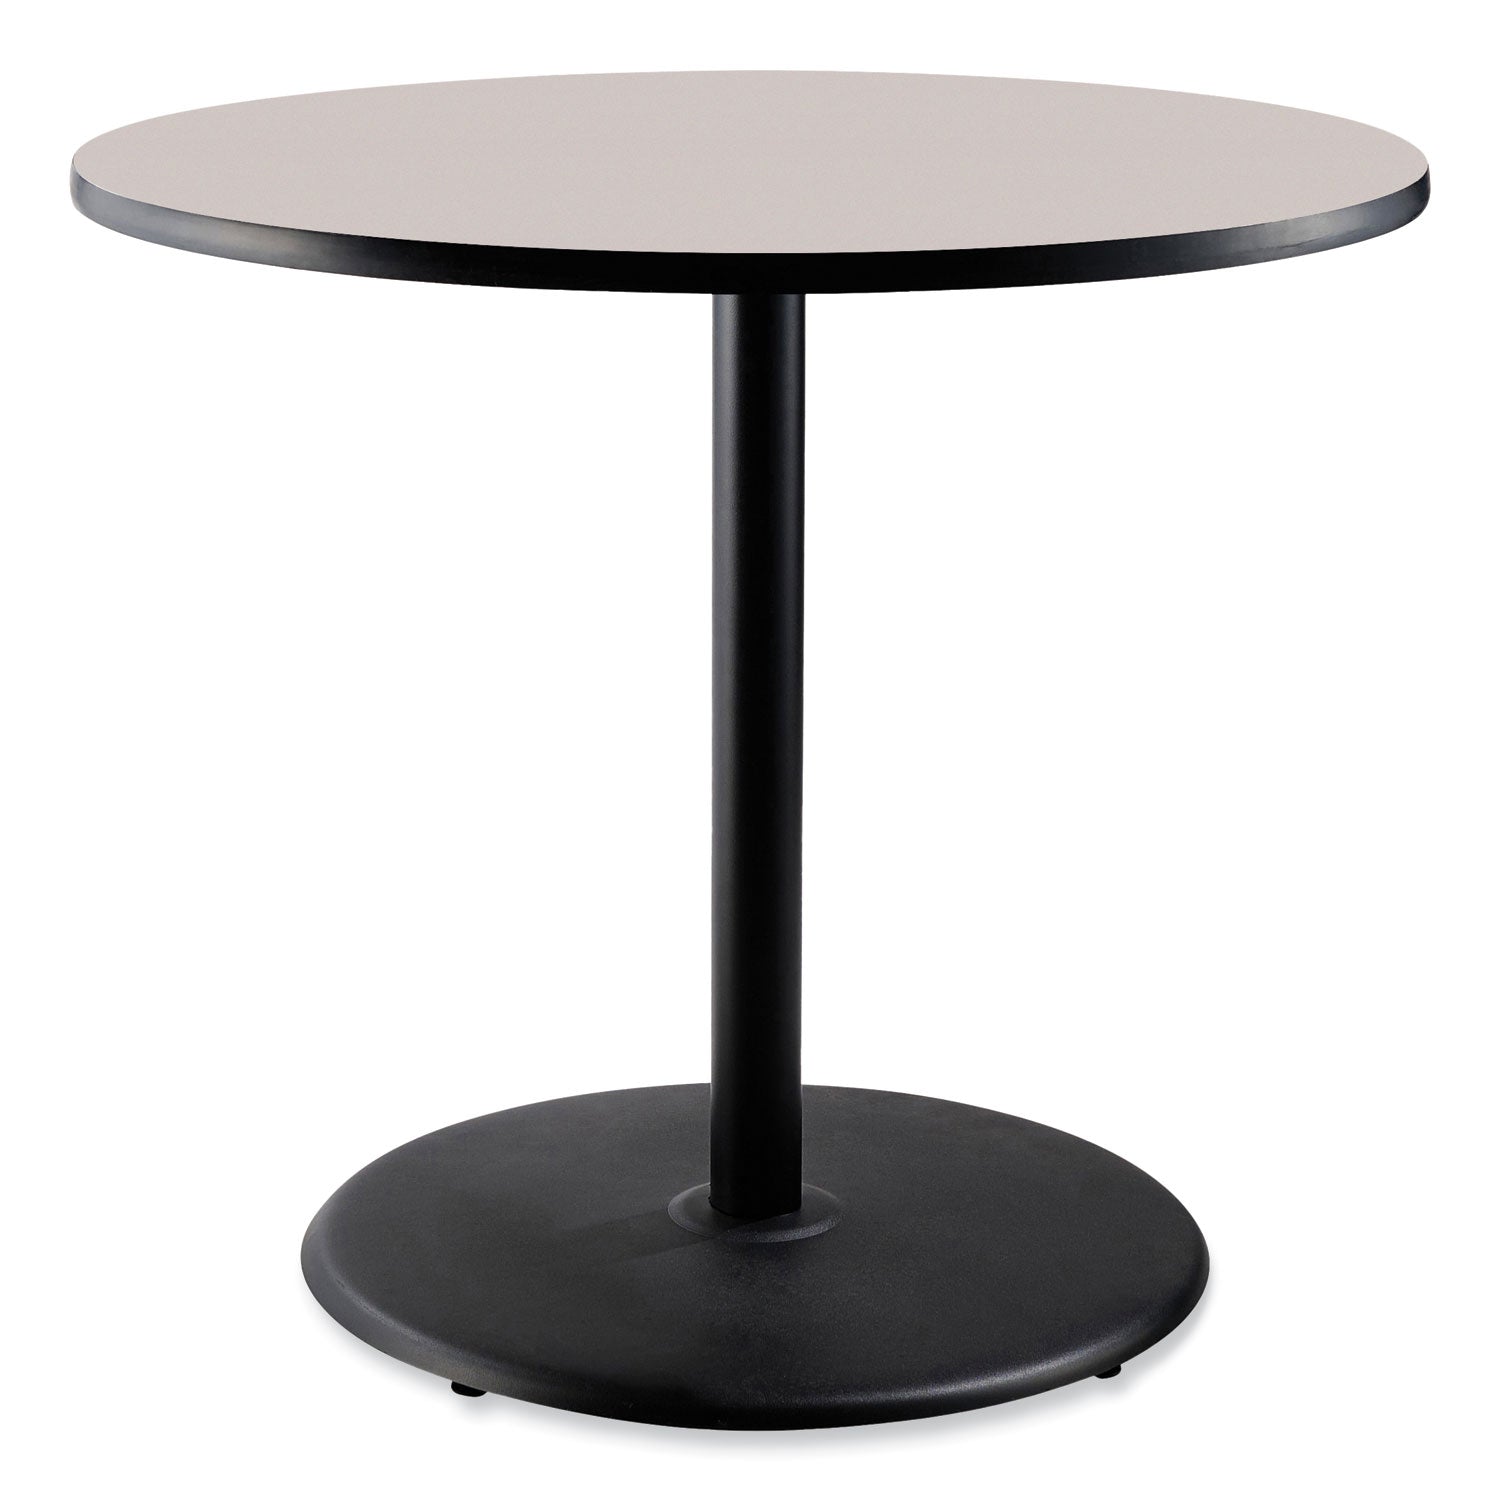 cafe-table-36-diameter-x-36h-round-top-base-gray-neubula-top-black-base-ships-in-7-10-business-days_npsct13636rc1gy - 1